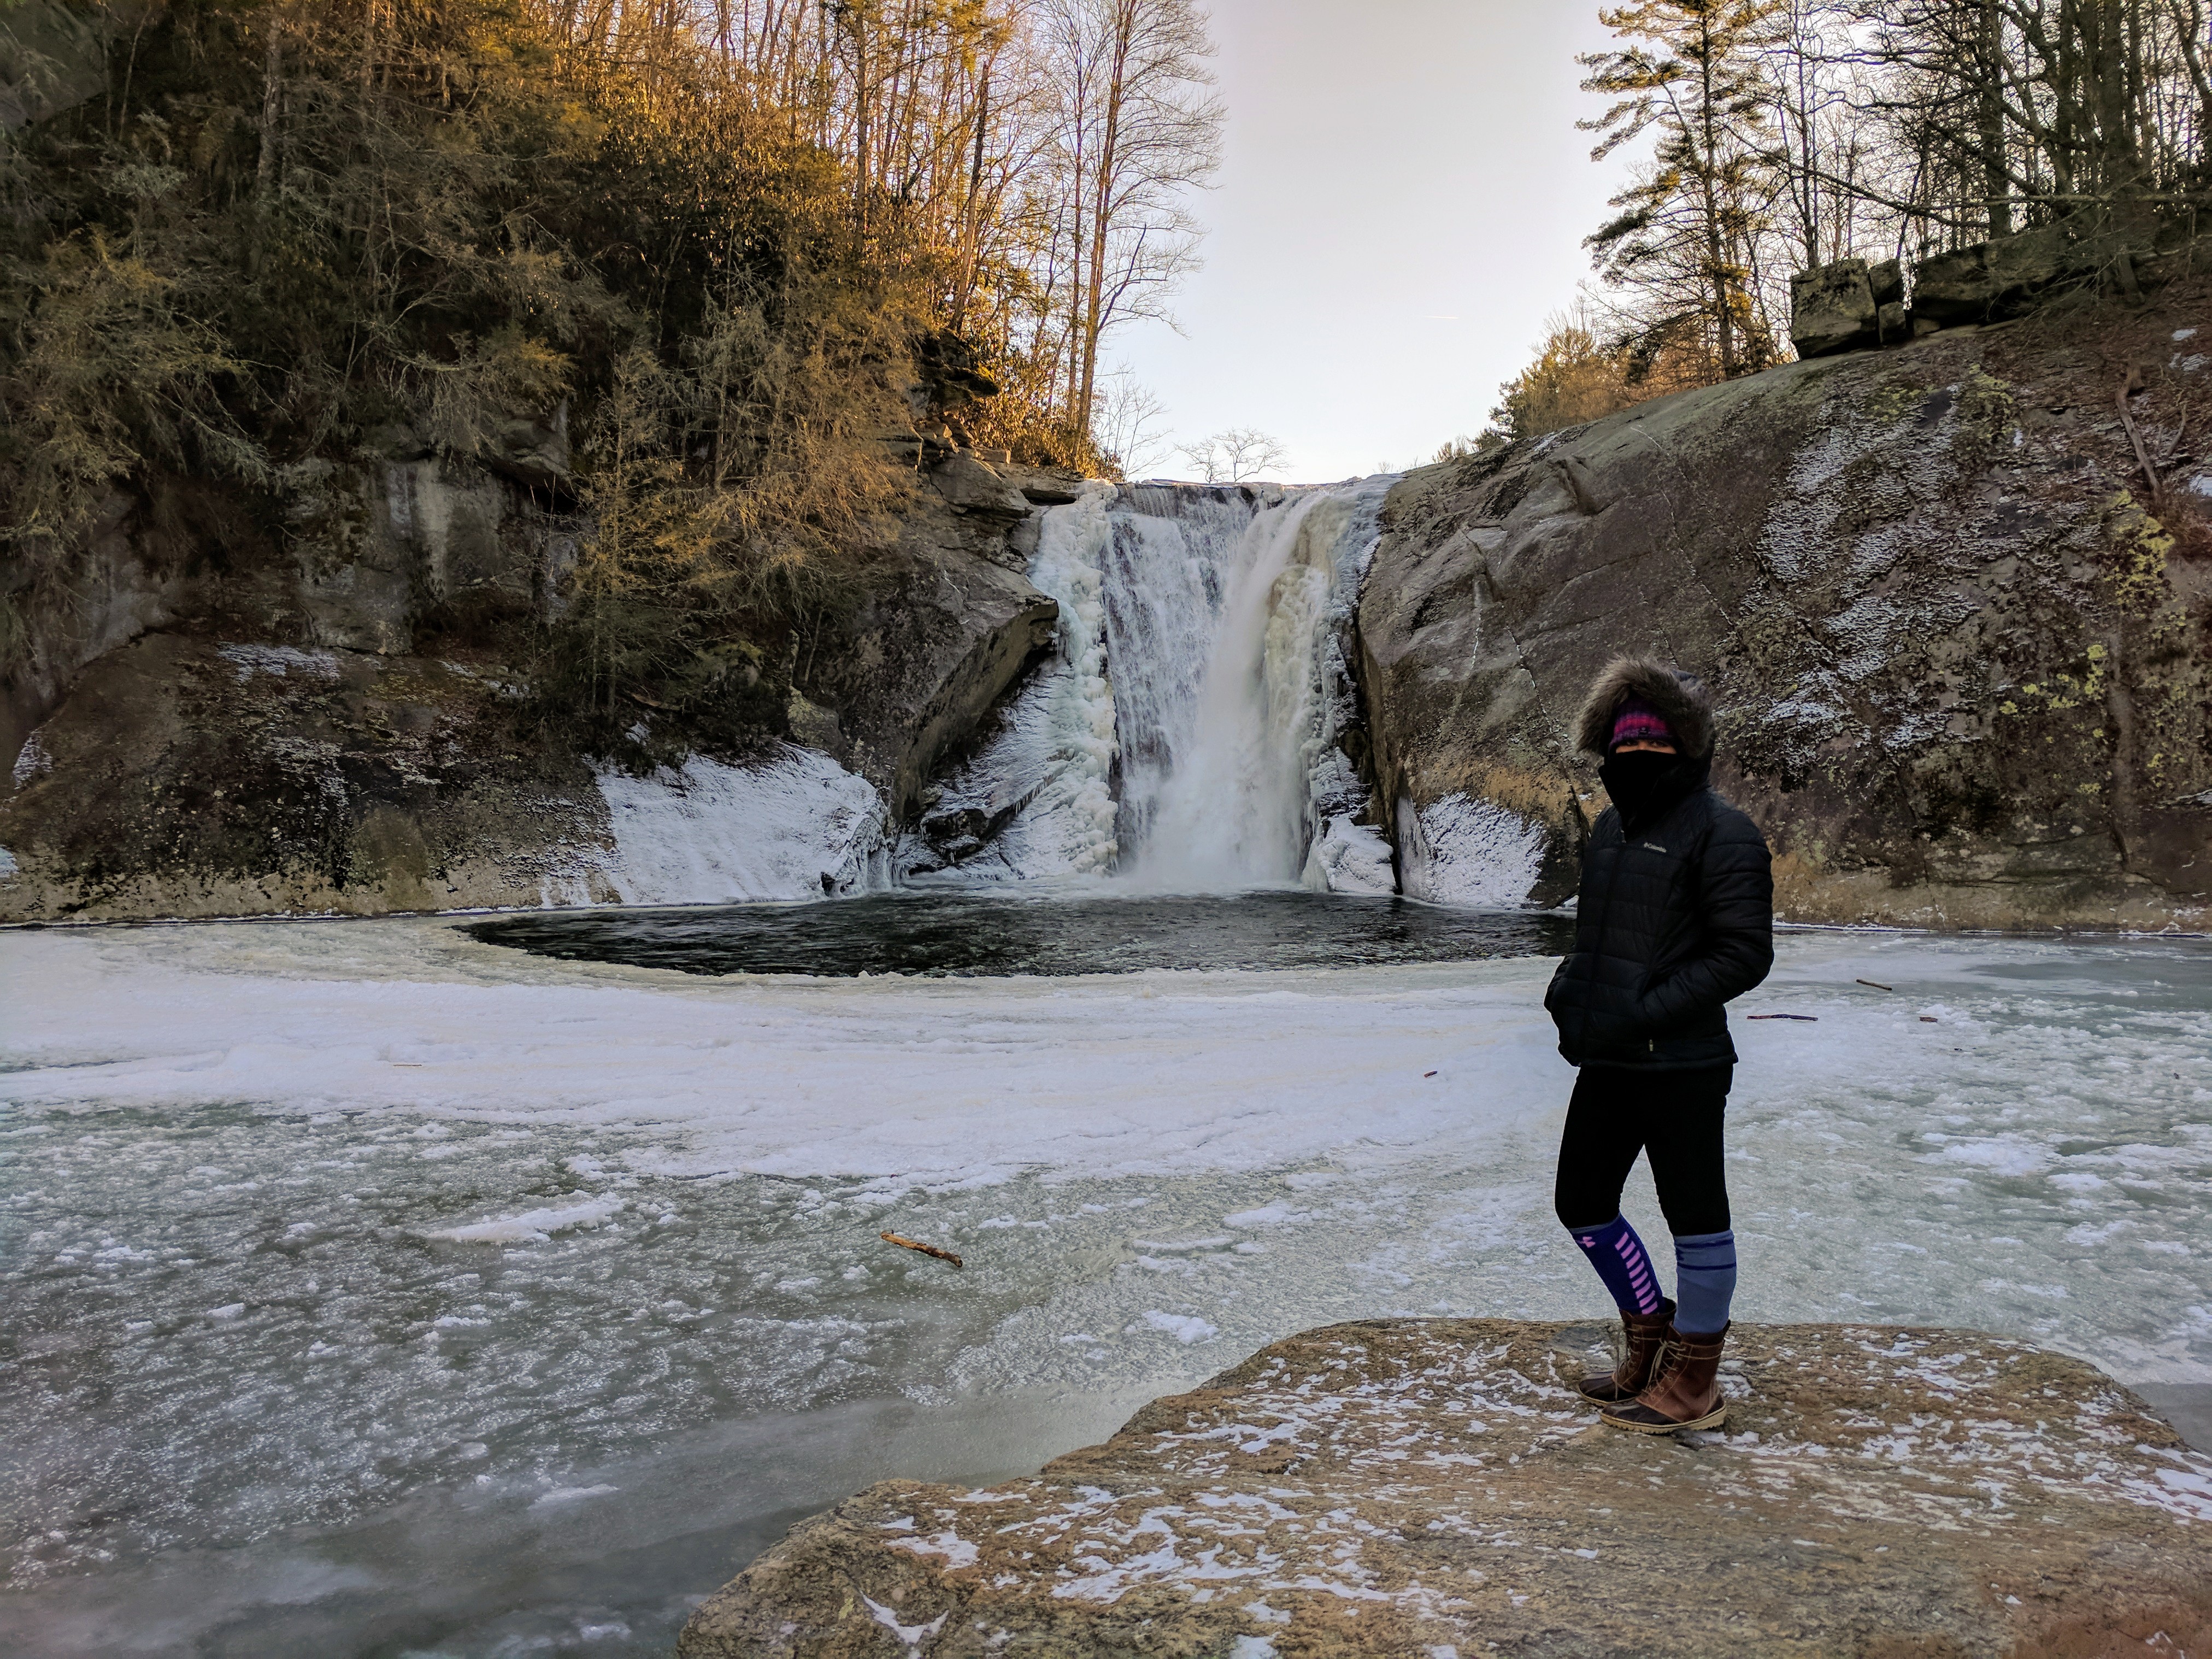 a woman stands on a rock next to a partially frozen pool with icy water pouring in from a nearby waterfall